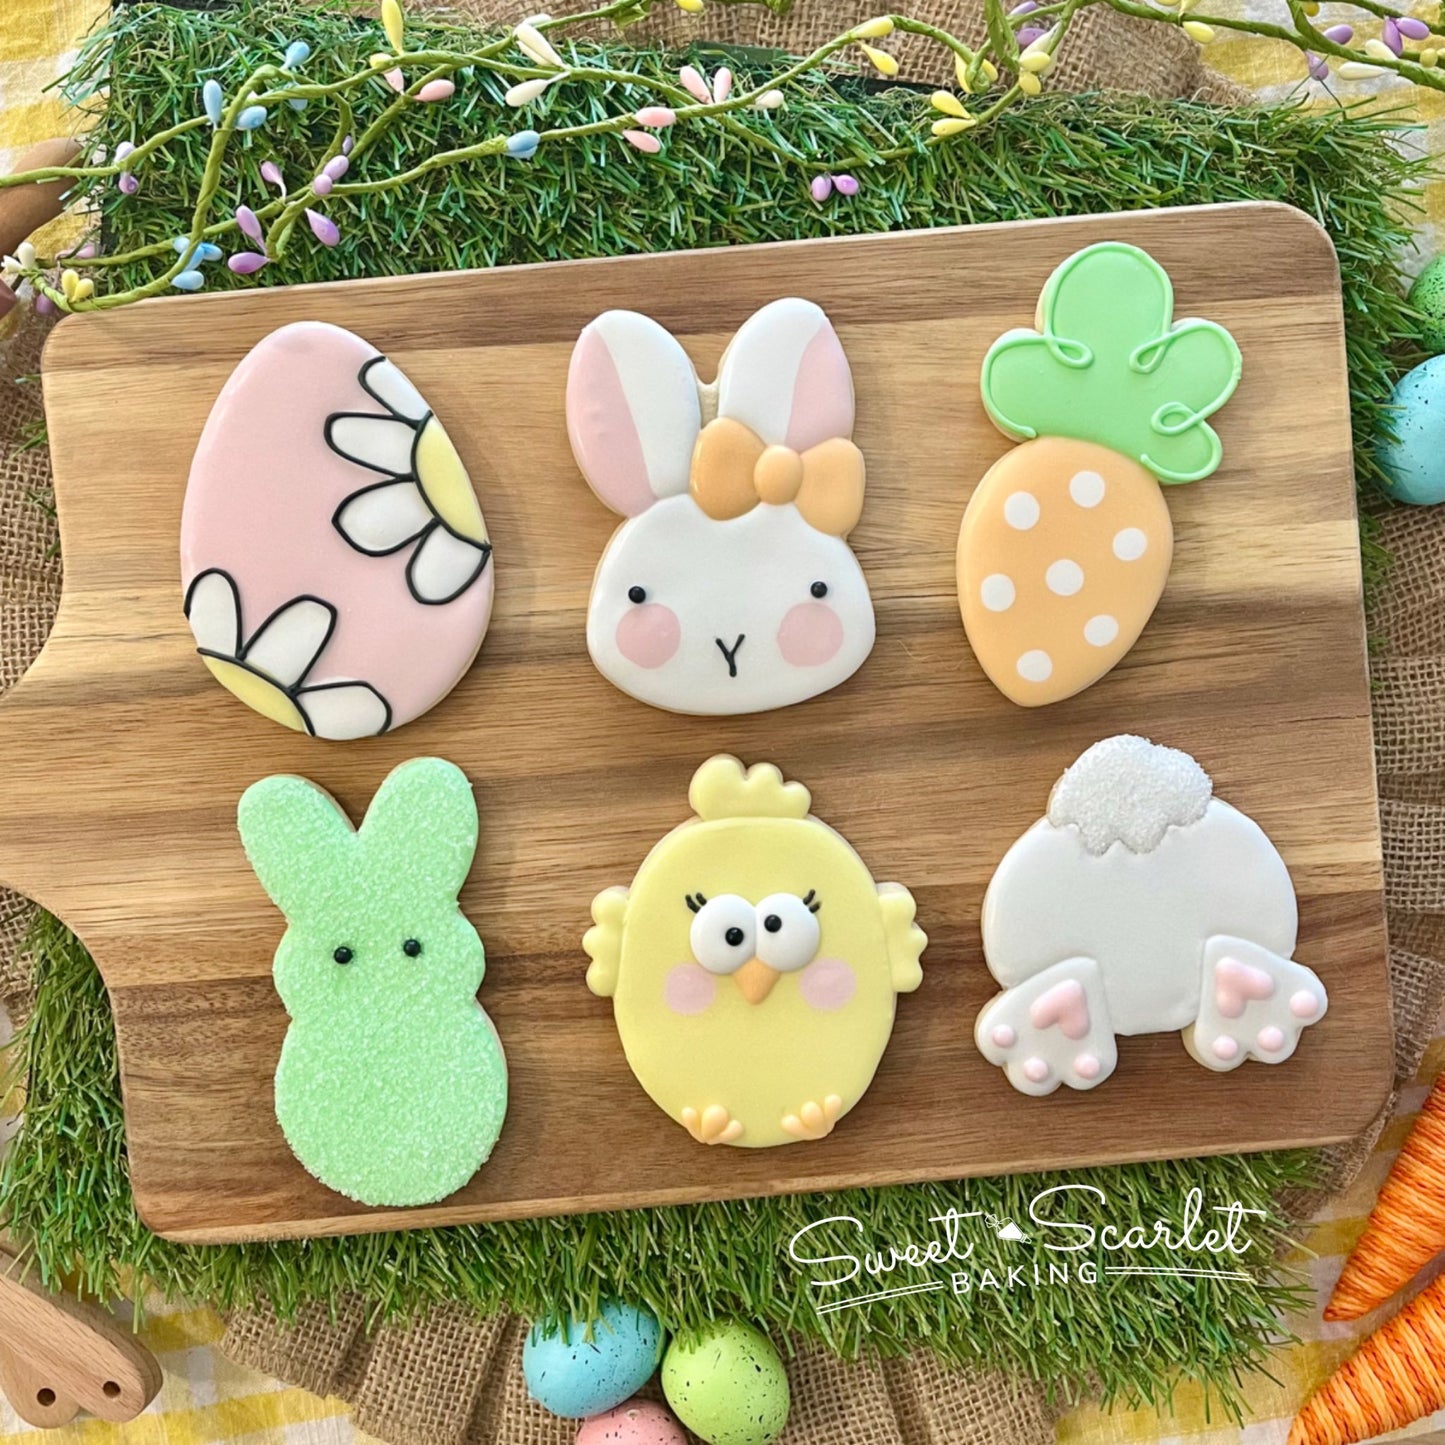 Easter Adult Beginner Cookie Class - Thurs 3/7 6:00 pm